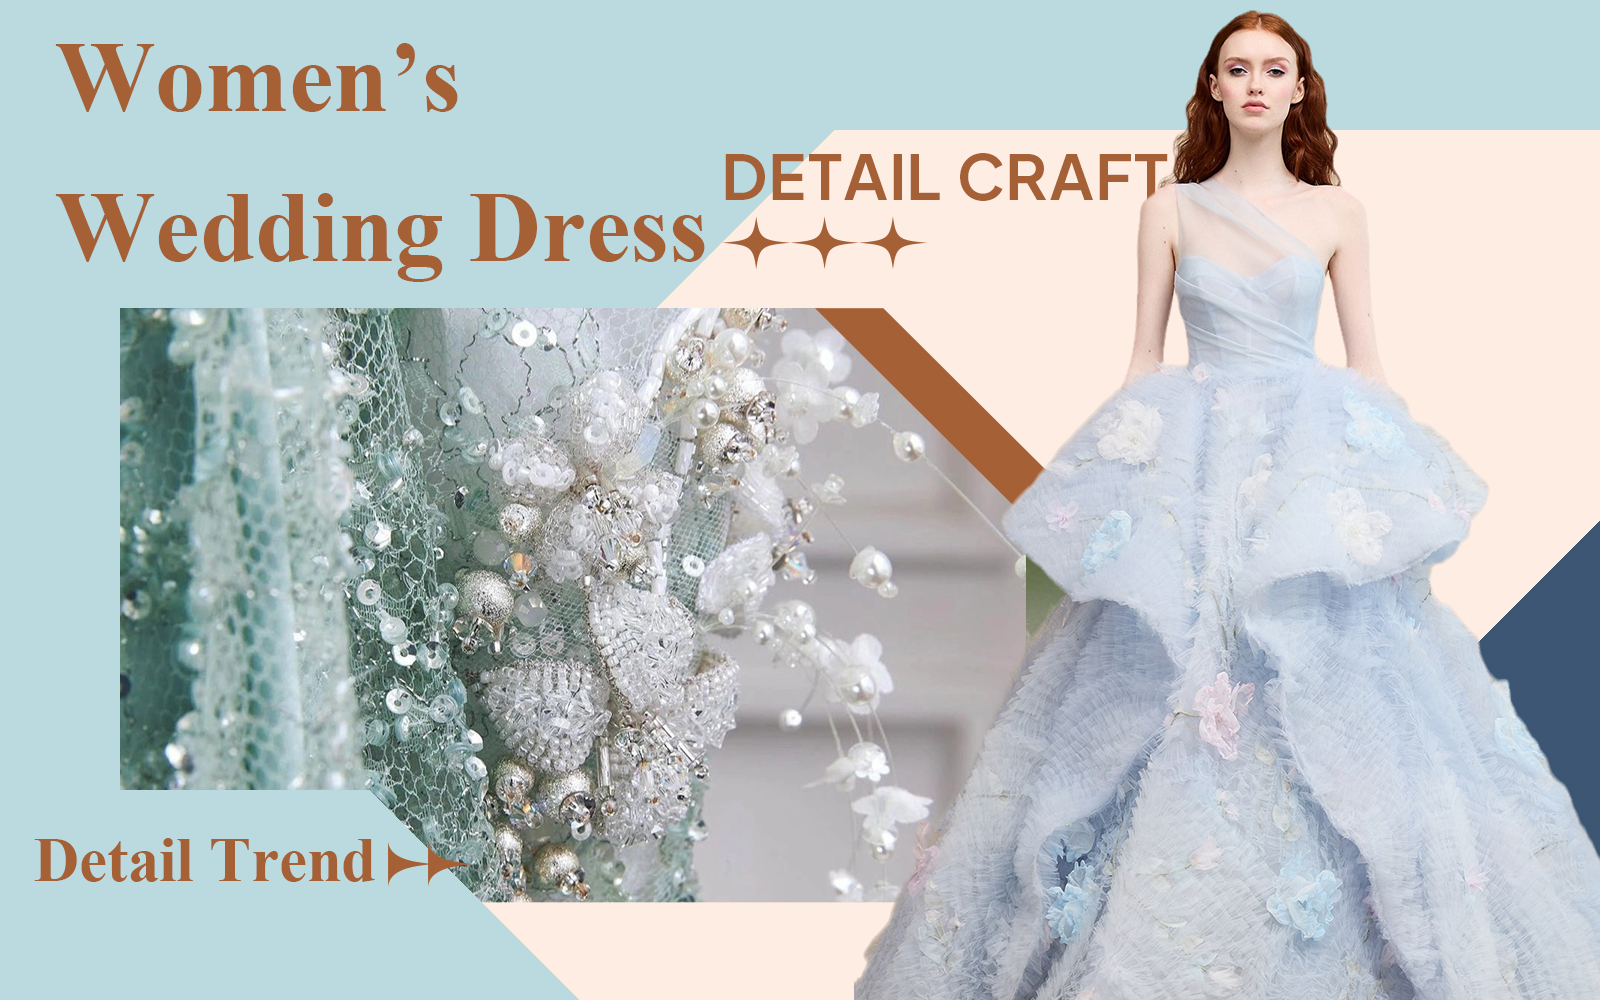 The Detail & Craft Trend for Women's Wedding Dress